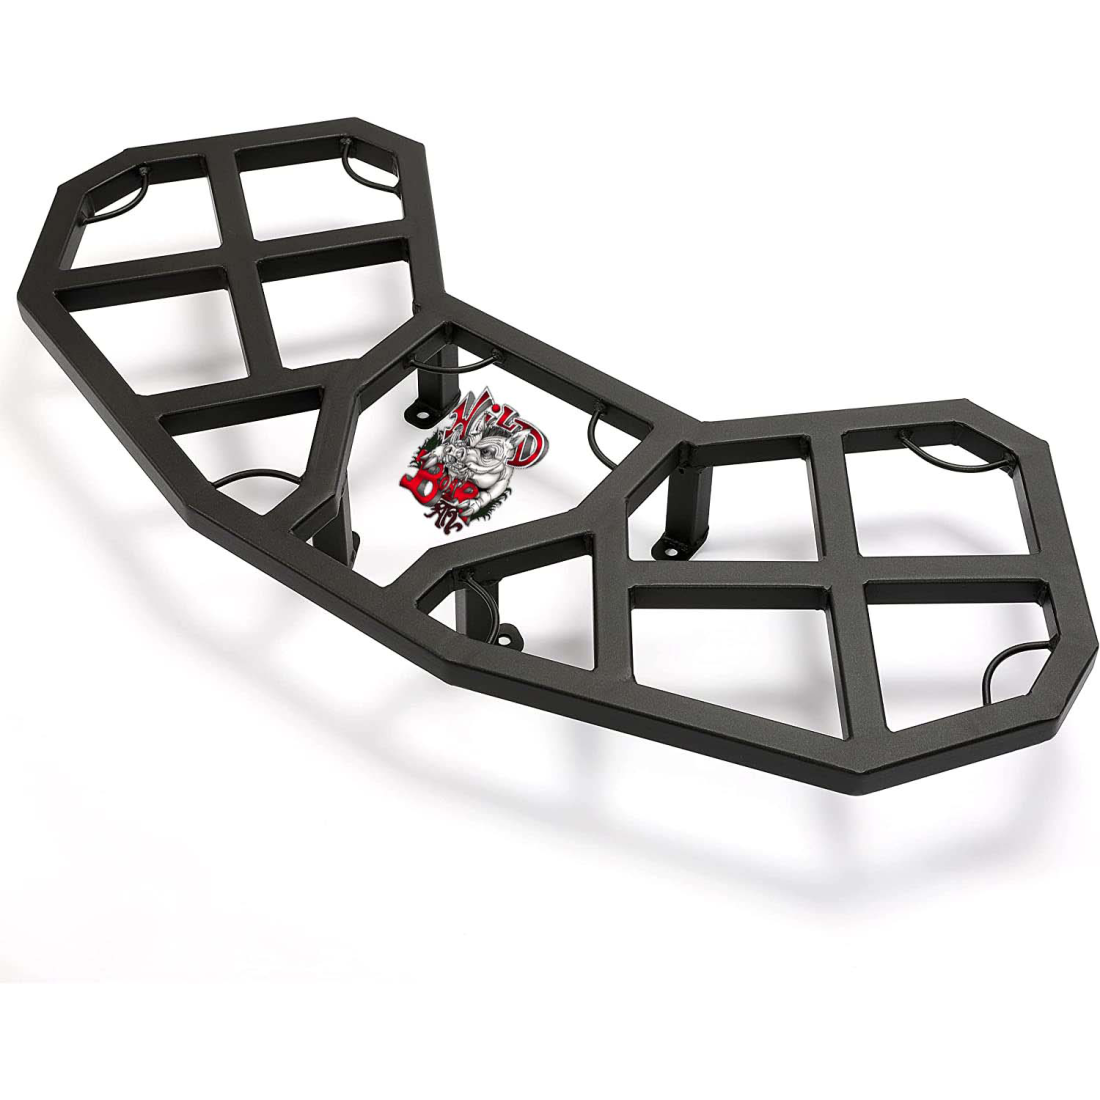 Canam Renegade All Years All Models Black Rear Rack